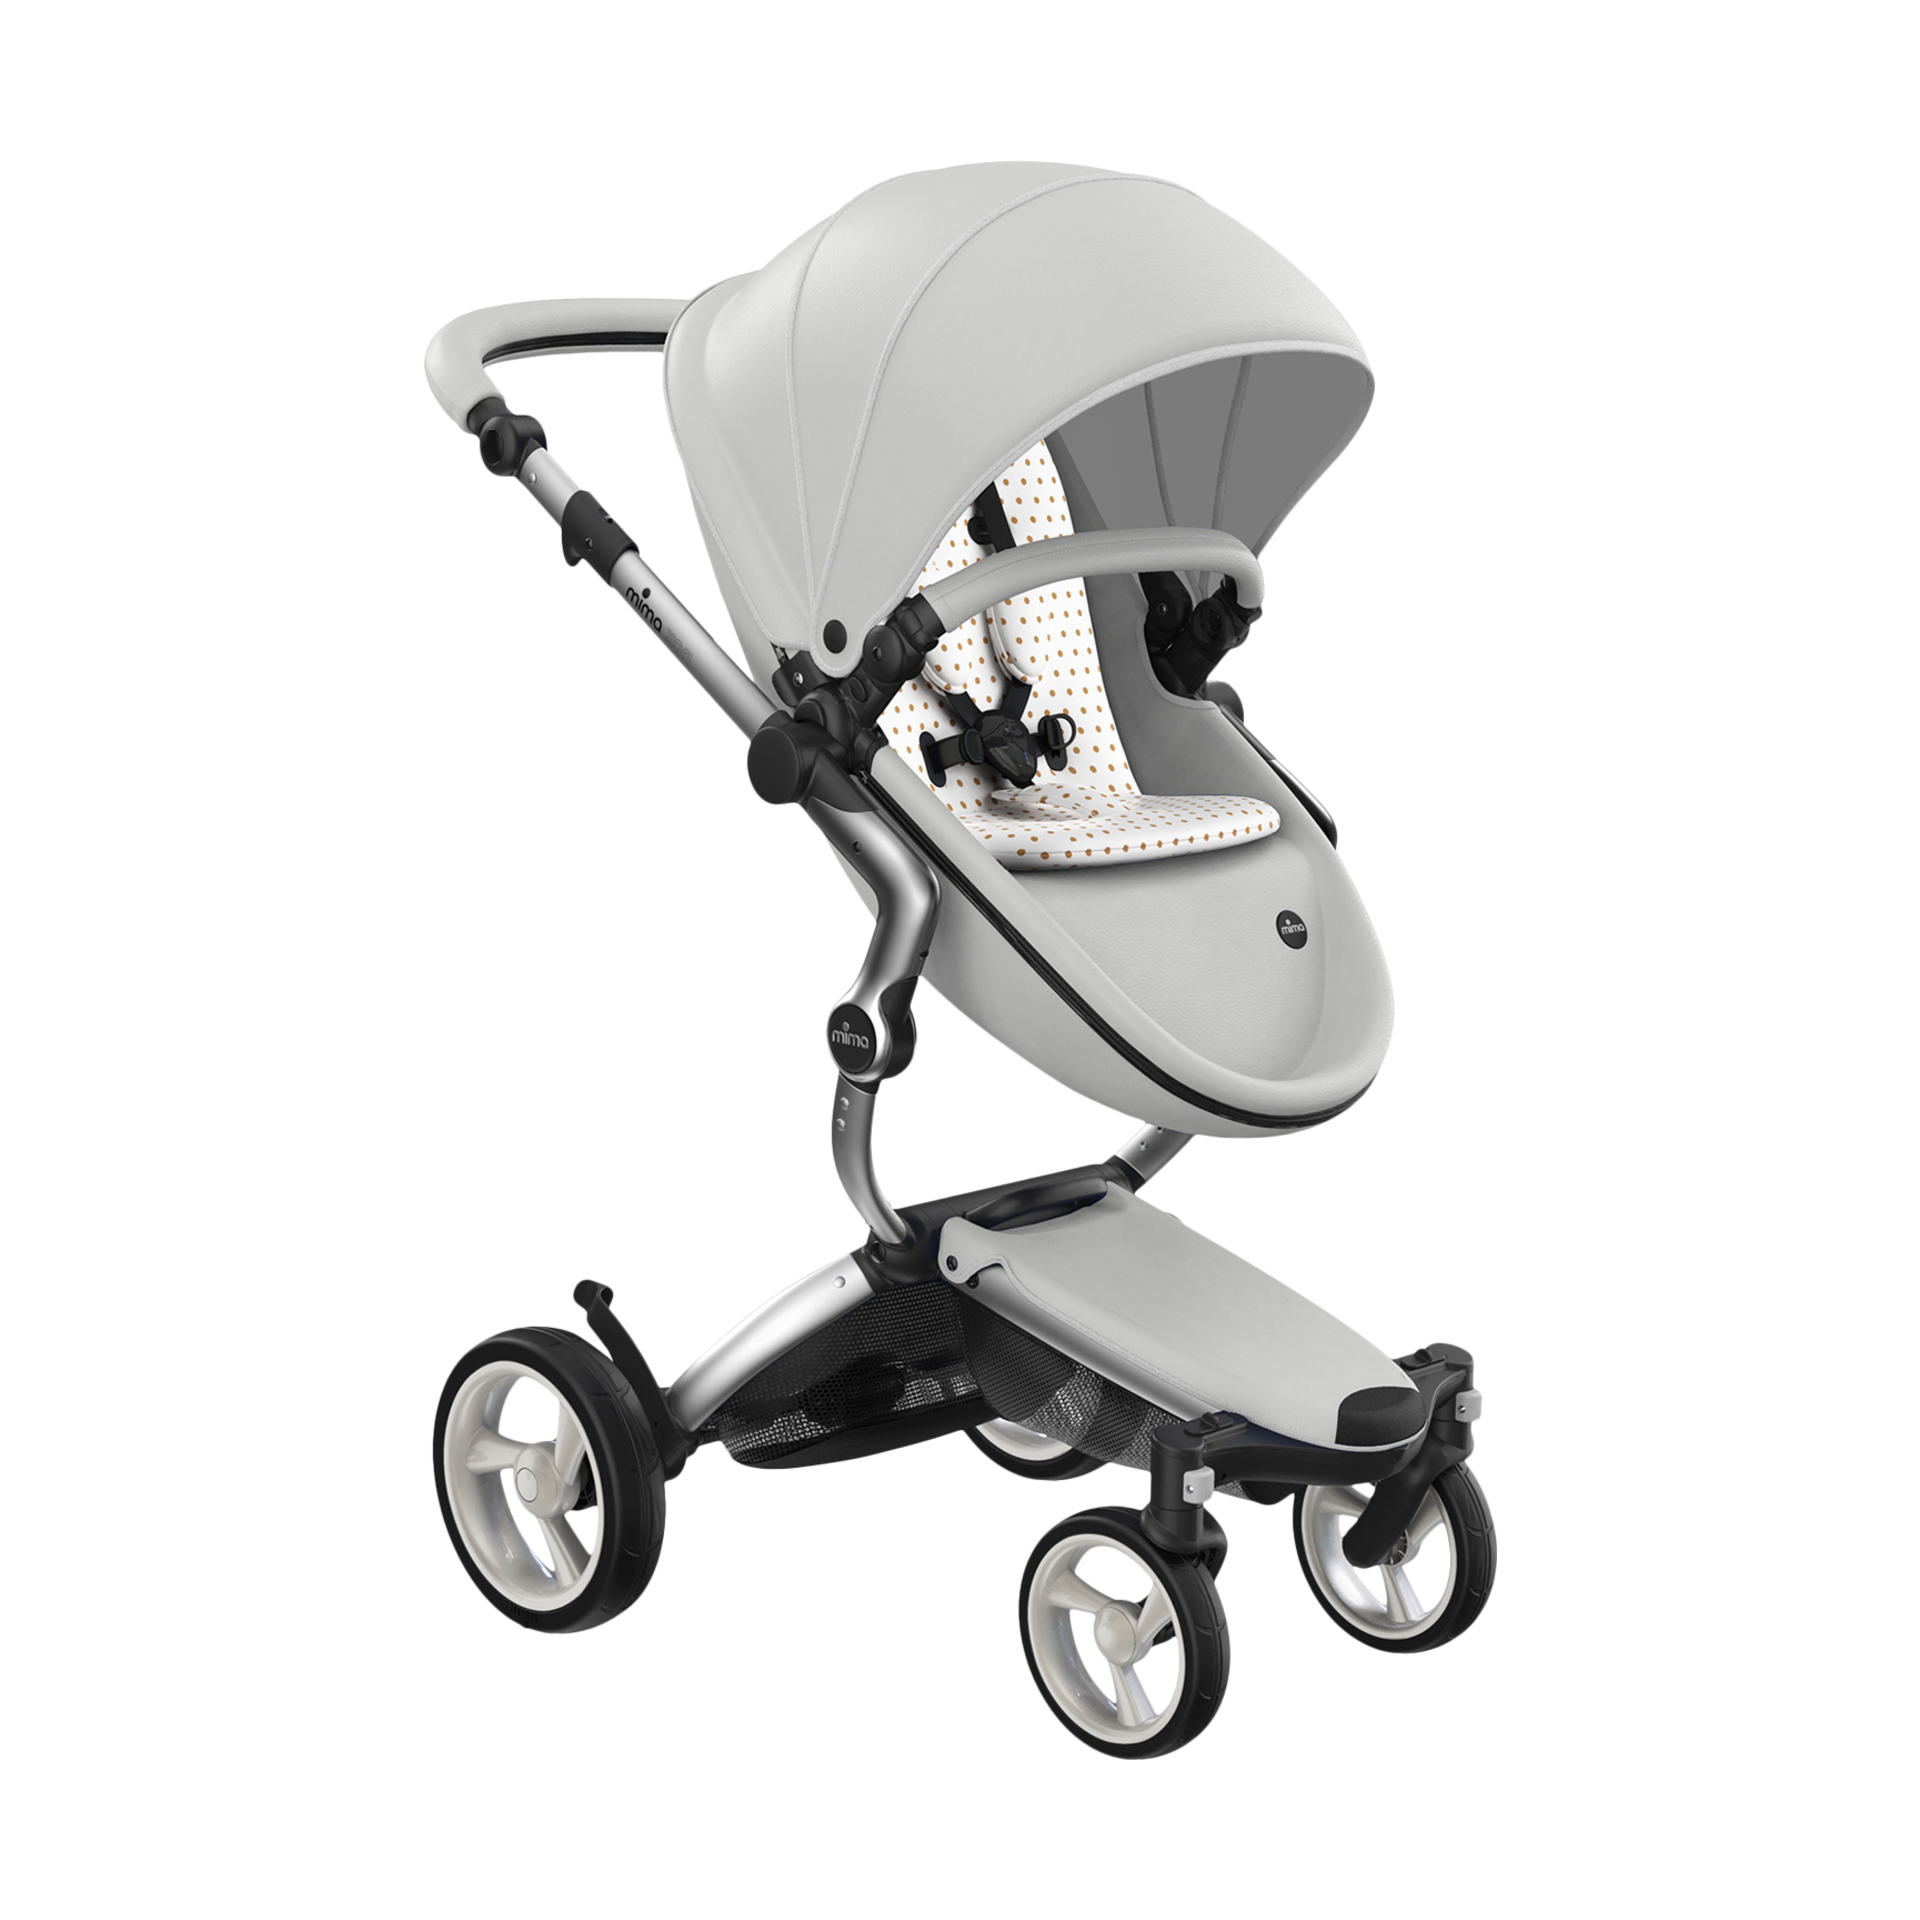 mima stroller and car seat